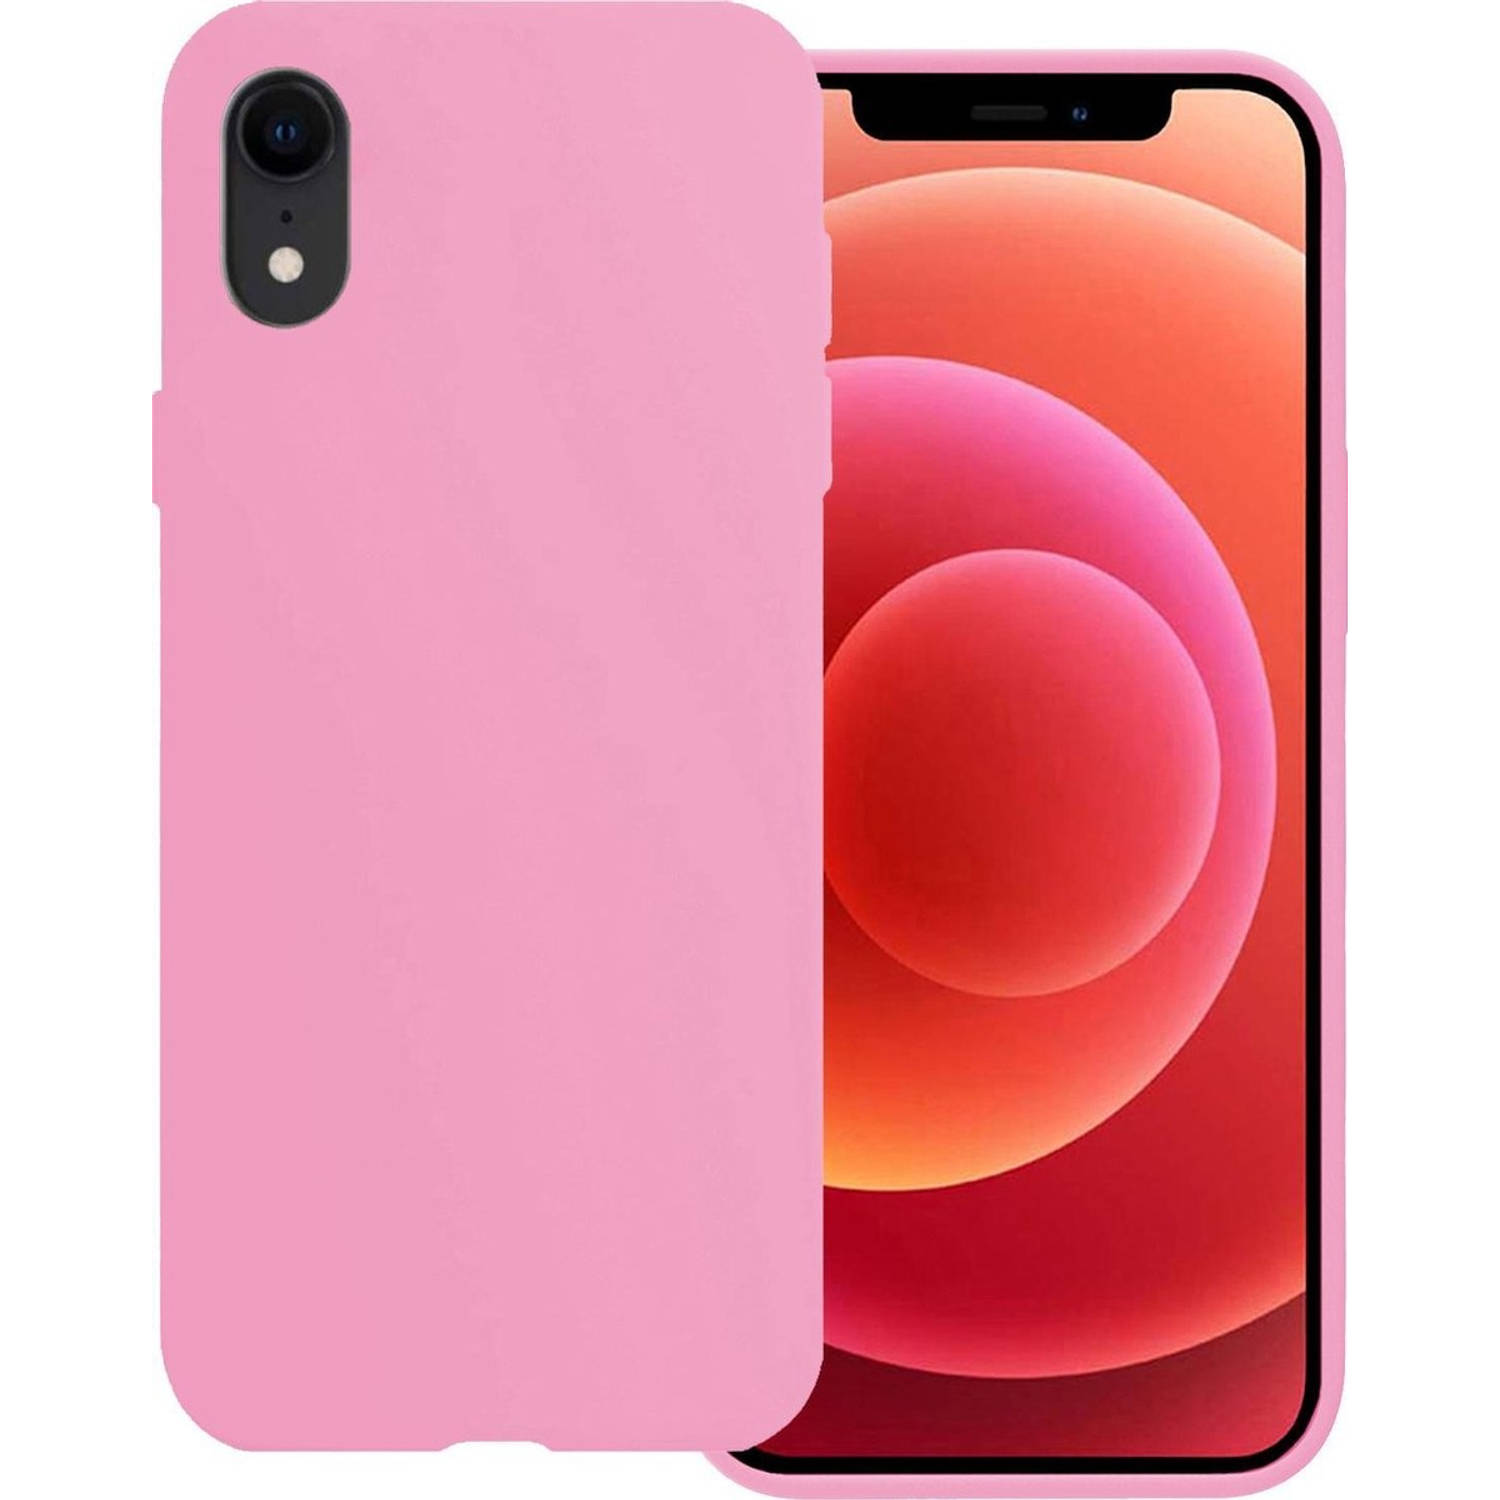 Basey iPhone XR Hoesje Siliconen Hoes Case Cover iPhone XR-Lichtroze